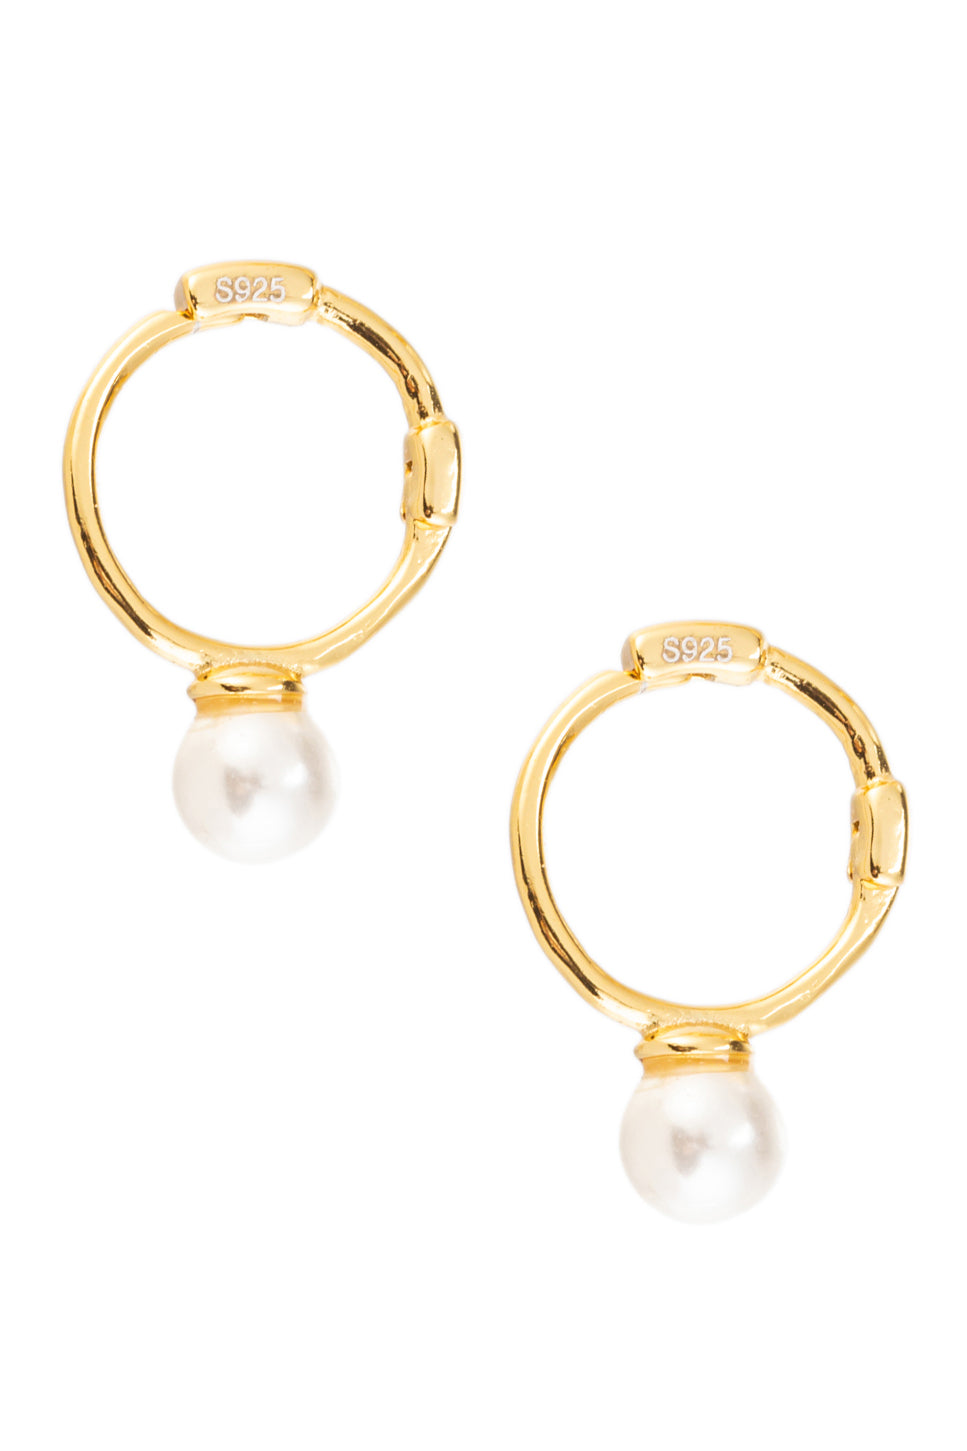 24k gold plated huggie earrings with shell pearls.